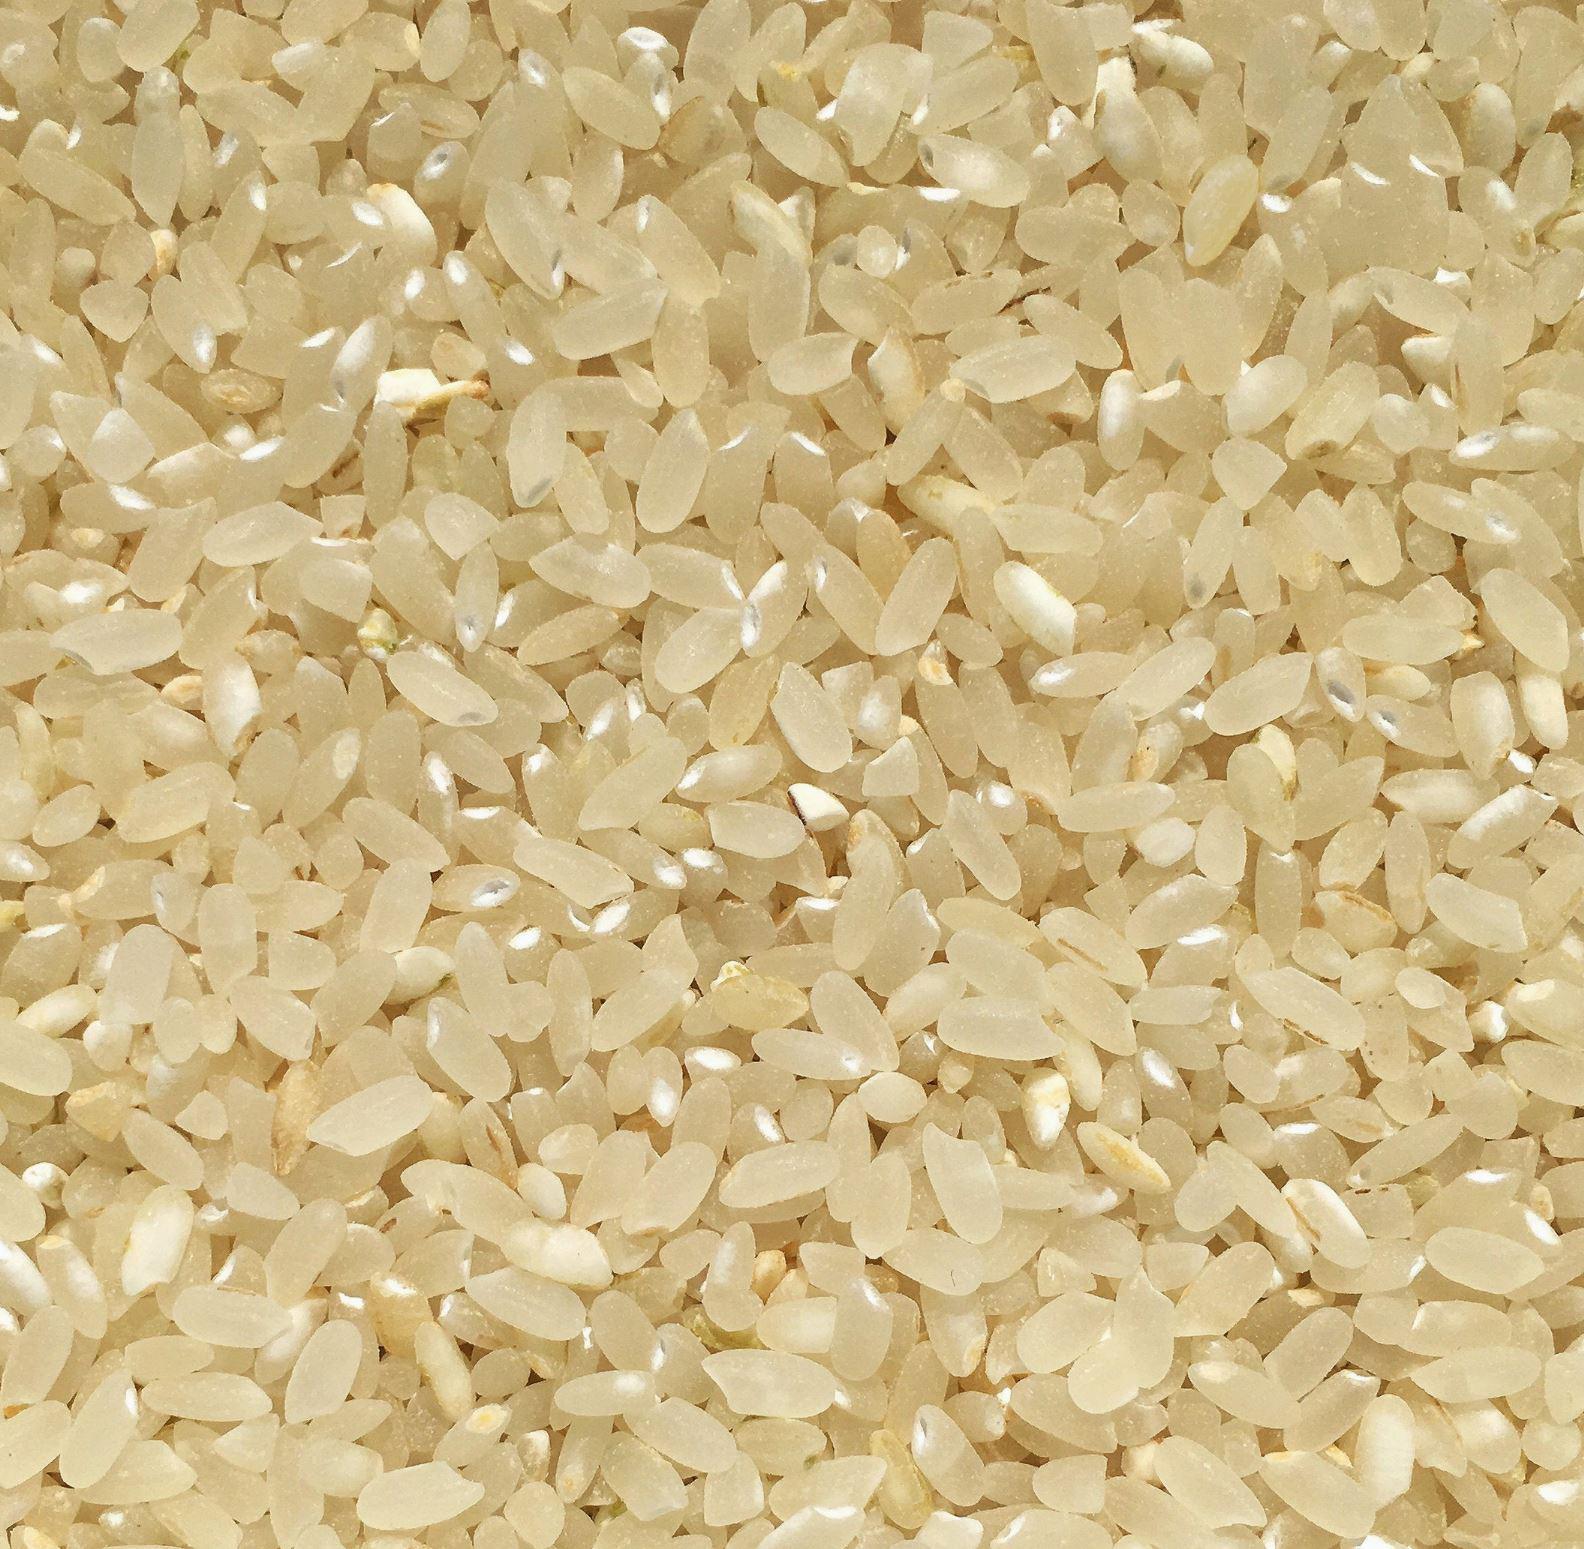 Chico Rice | Blonde Milled Califor﻿nia Japonica